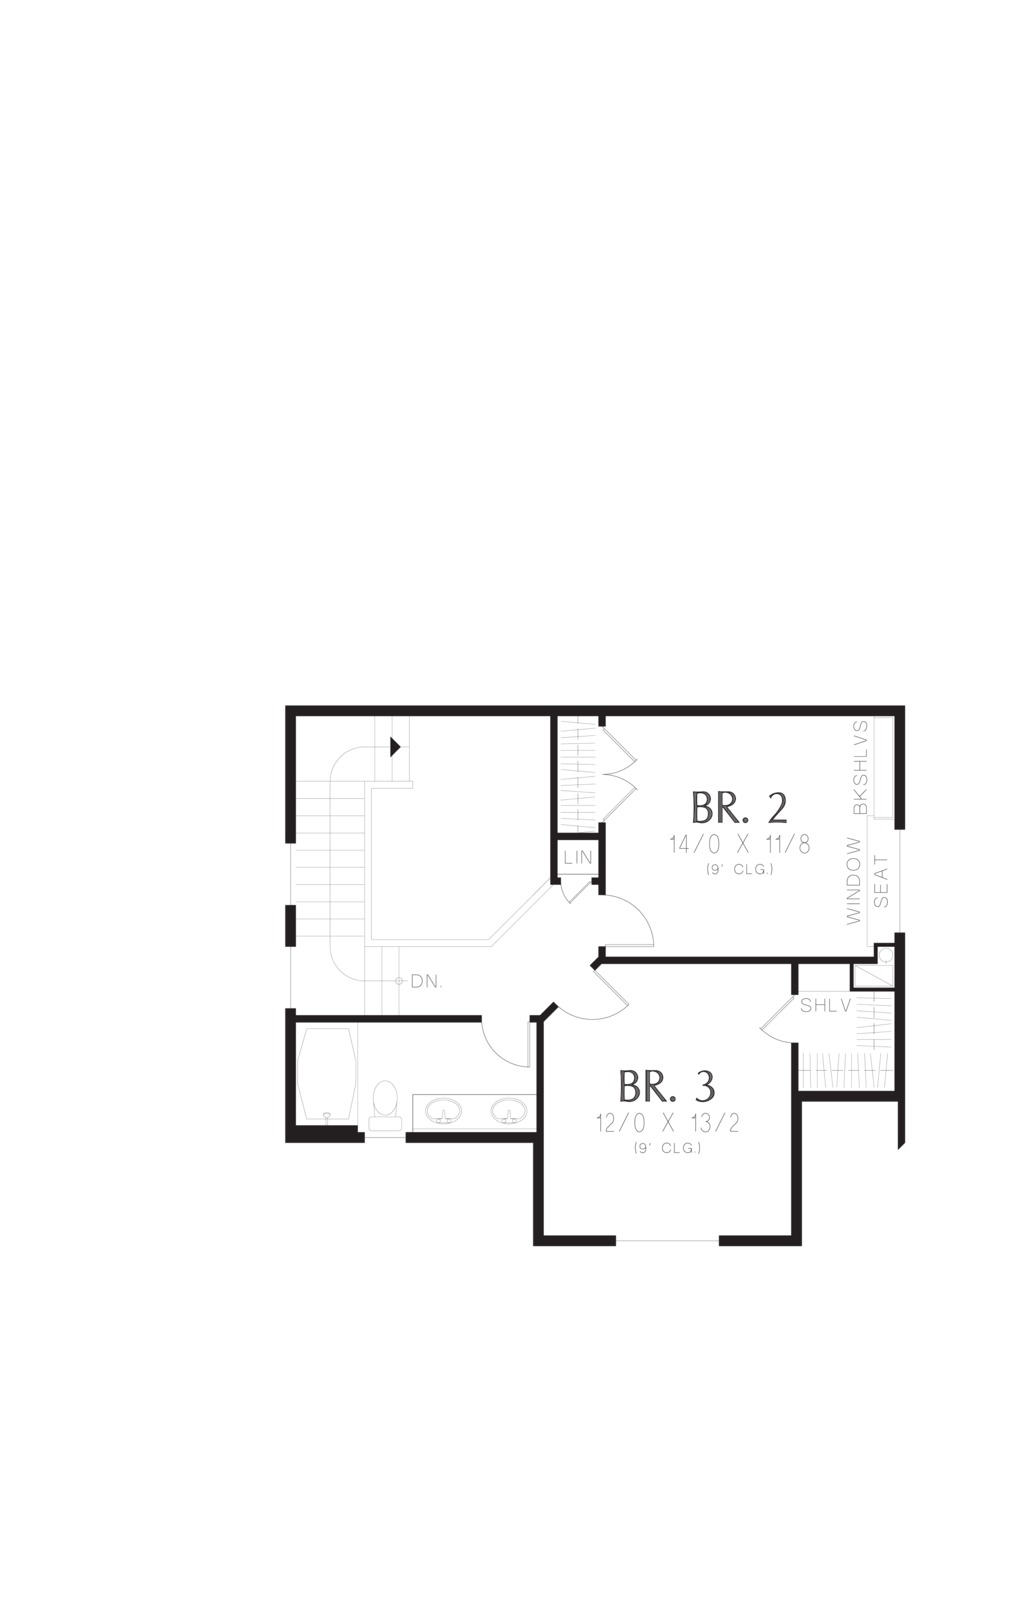 Cottage Style House Plan 3 Beds 2 5 Baths 1712 Sq Ft Plan 48 575